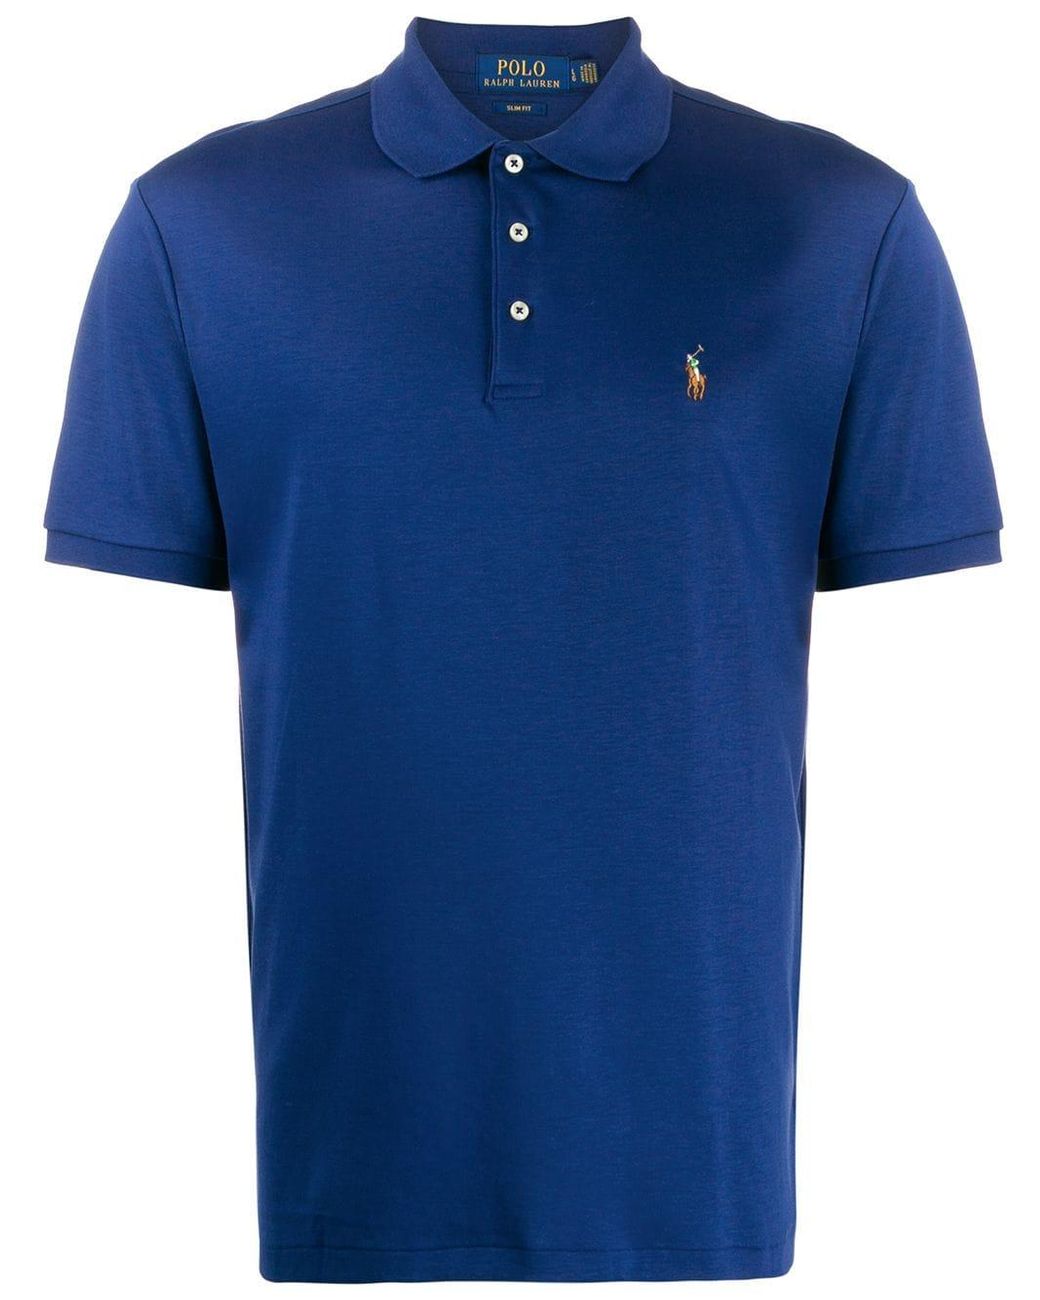 Polo Ralph Lauren Cotton Embroidered Logo Polo Shirt in Blue for Men - Lyst